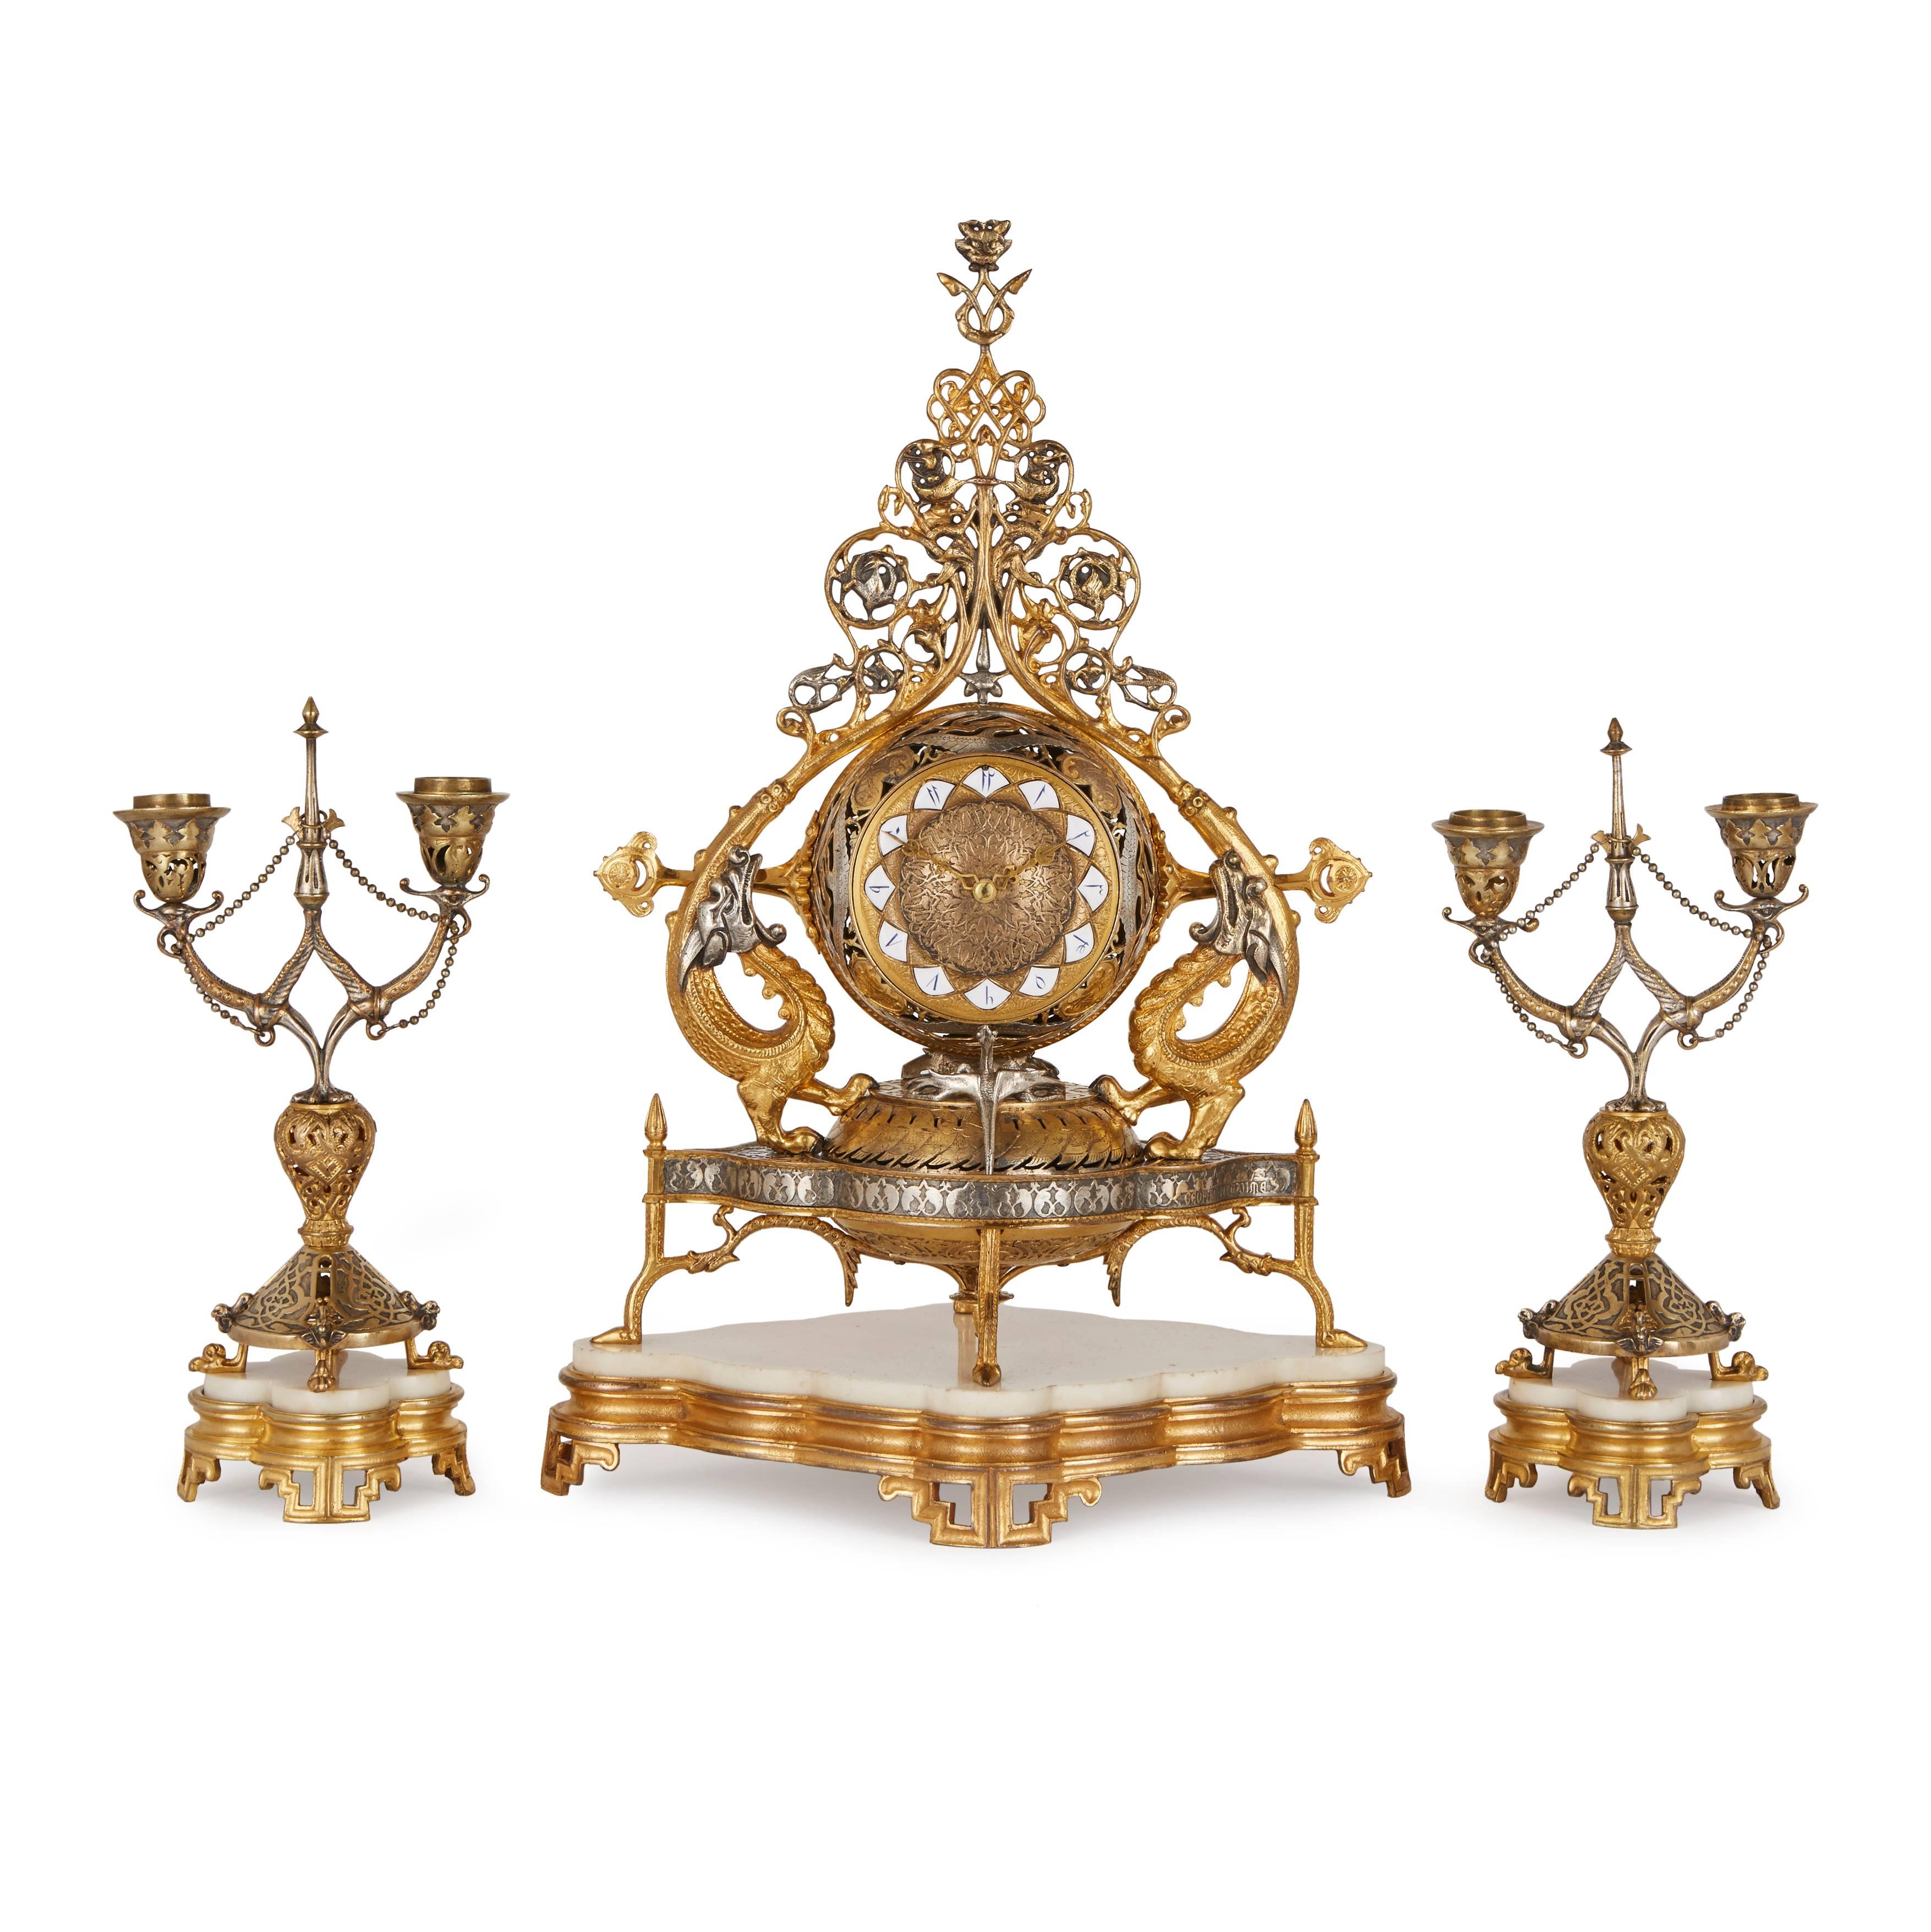 By Dechaume and Delafontaine, in the Persian style, comprising a central clock with a pair of flanking two-light candelabra.
The clock signed Gauffroy Dechaume and the bronze marked AD for Auguste Delafontaine
Clock height 45cm, width 31cm, depth